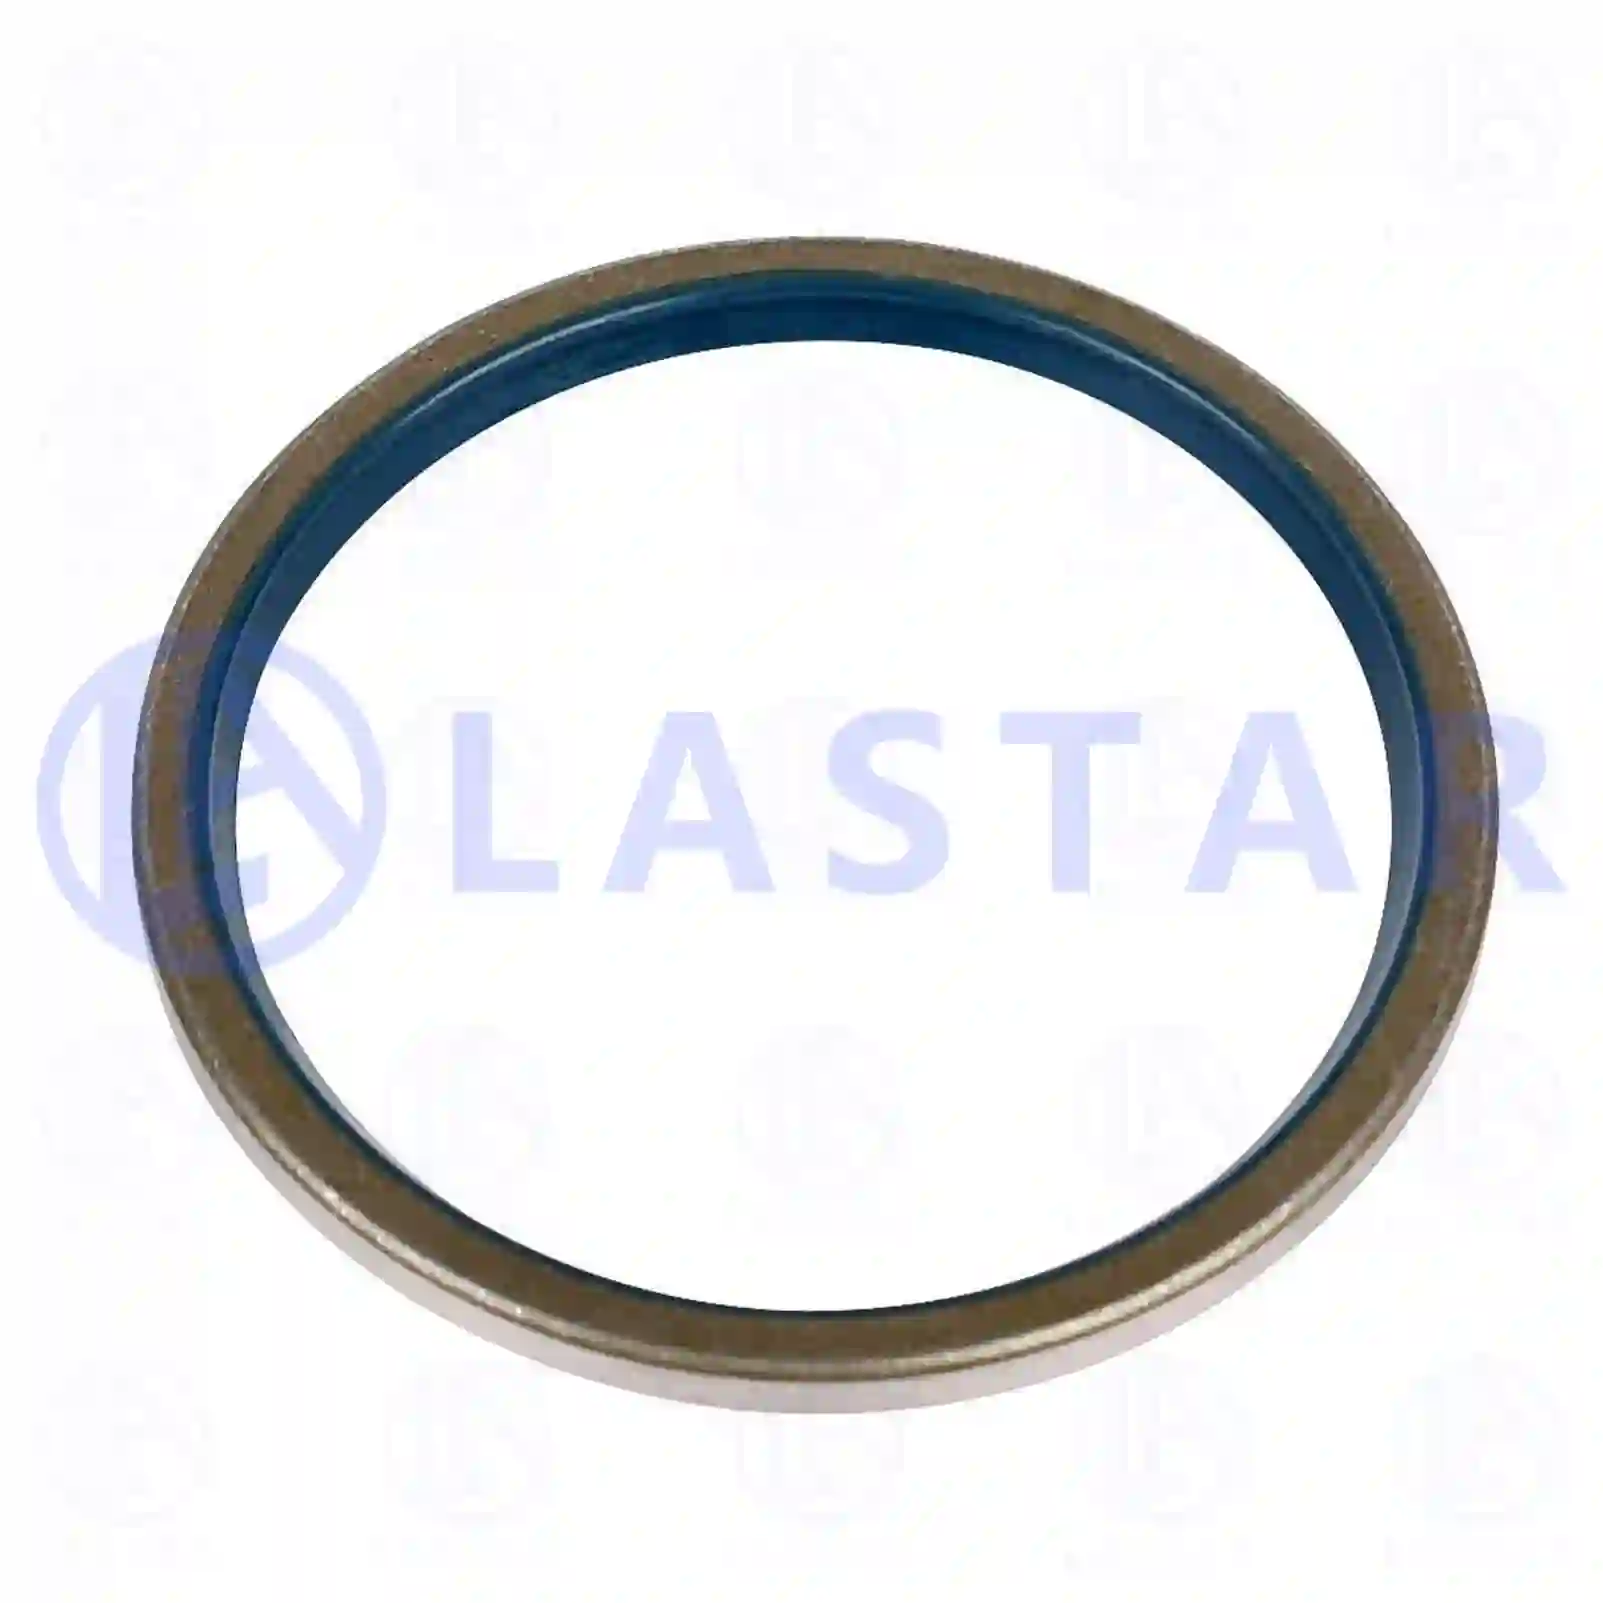 Oil seal, 77730603, 06562790076, 06562790077, 06562790220, 06562790222, 06562790273, 06562790274, 06562790353, 81965010749, 0109974146, 0109975246, 0119973546, 080160118, 082135823 ||  77730603 Lastar Spare Part | Truck Spare Parts, Auotomotive Spare Parts Oil seal, 77730603, 06562790076, 06562790077, 06562790220, 06562790222, 06562790273, 06562790274, 06562790353, 81965010749, 0109974146, 0109975246, 0119973546, 080160118, 082135823 ||  77730603 Lastar Spare Part | Truck Spare Parts, Auotomotive Spare Parts